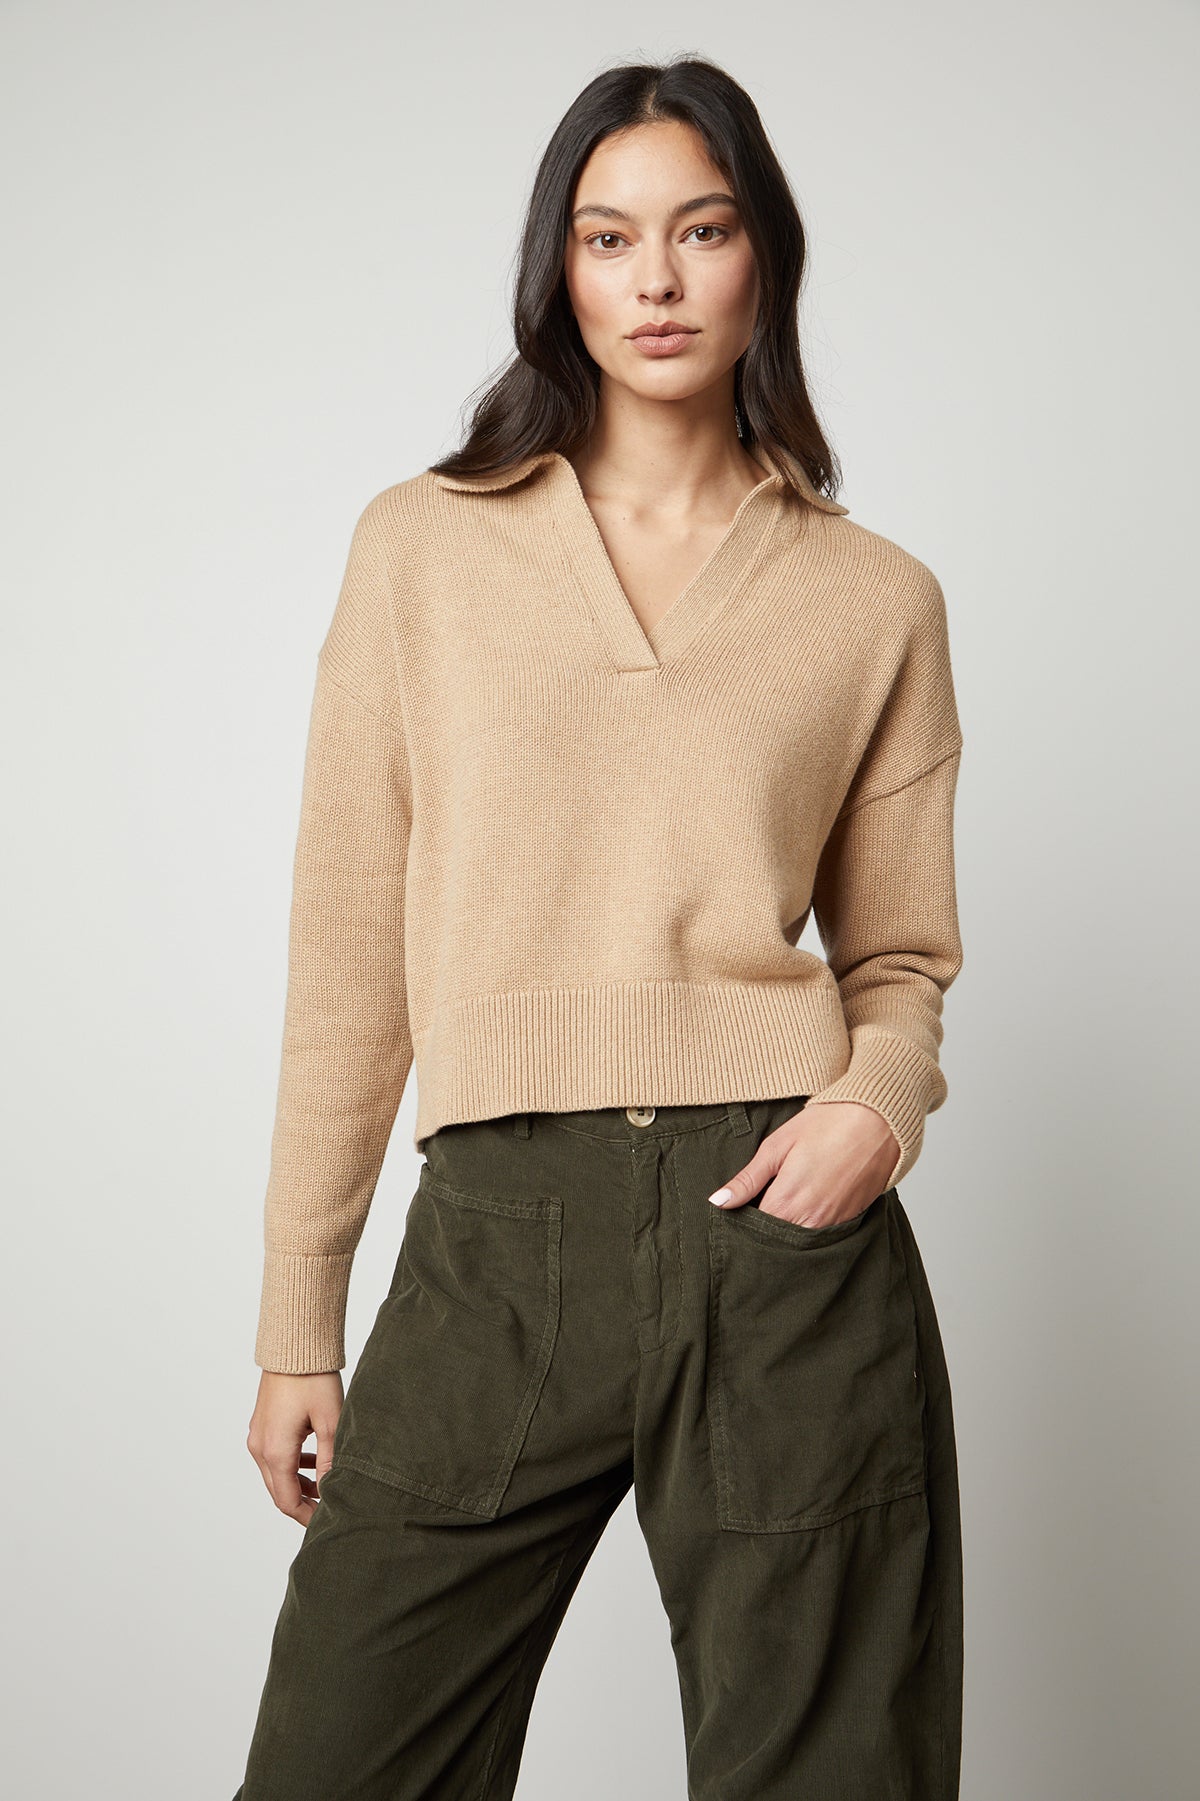   The model is wearing a layered LUCIE POLO SWEATER by Velvet by Graham & Spencer with a ribbed V-neckline, paired with olive pants. 